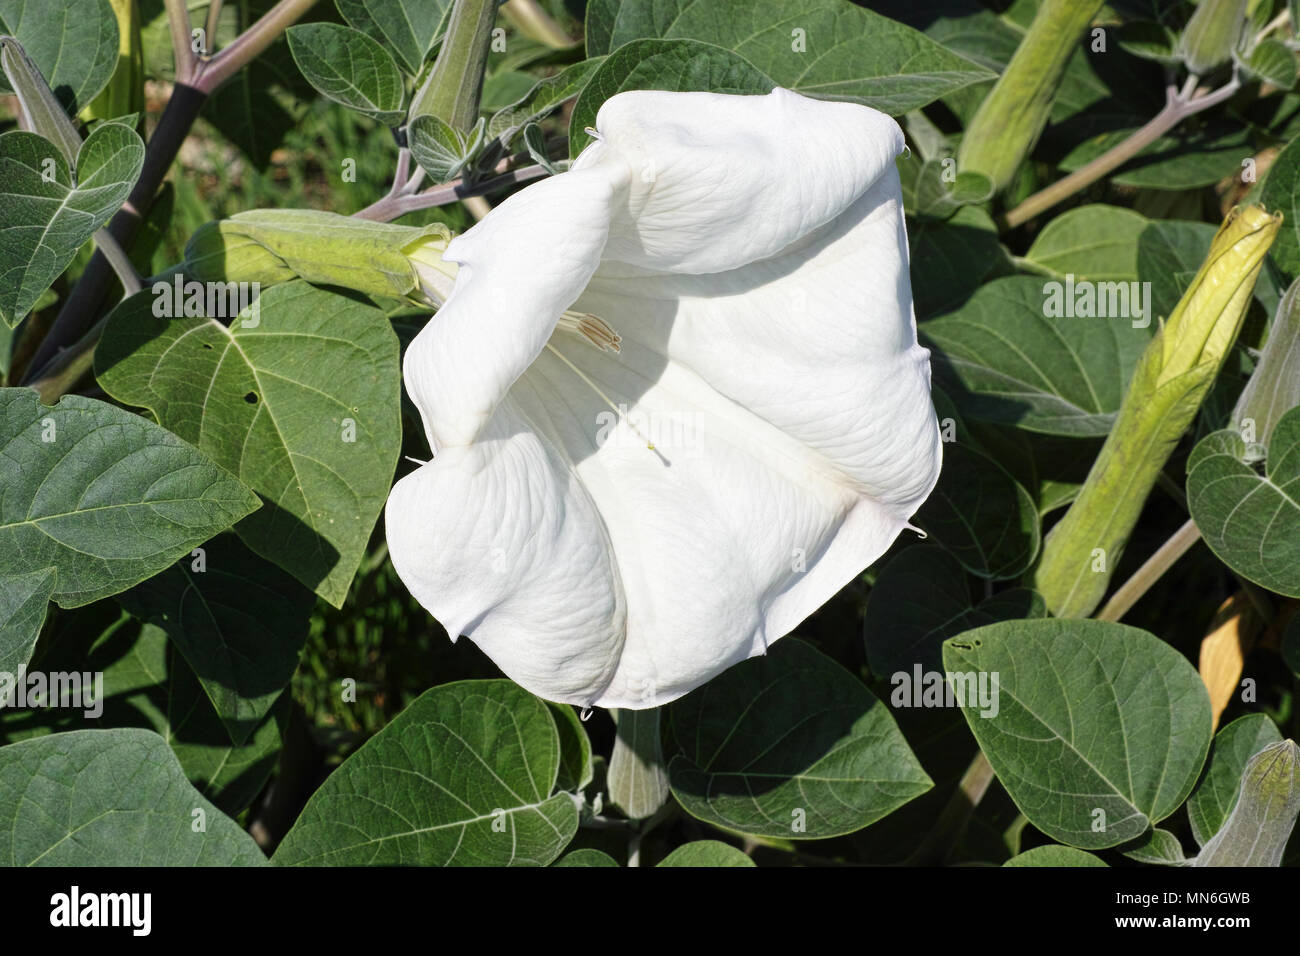 flower and leaves of devil's trumpet plant Stock Photo